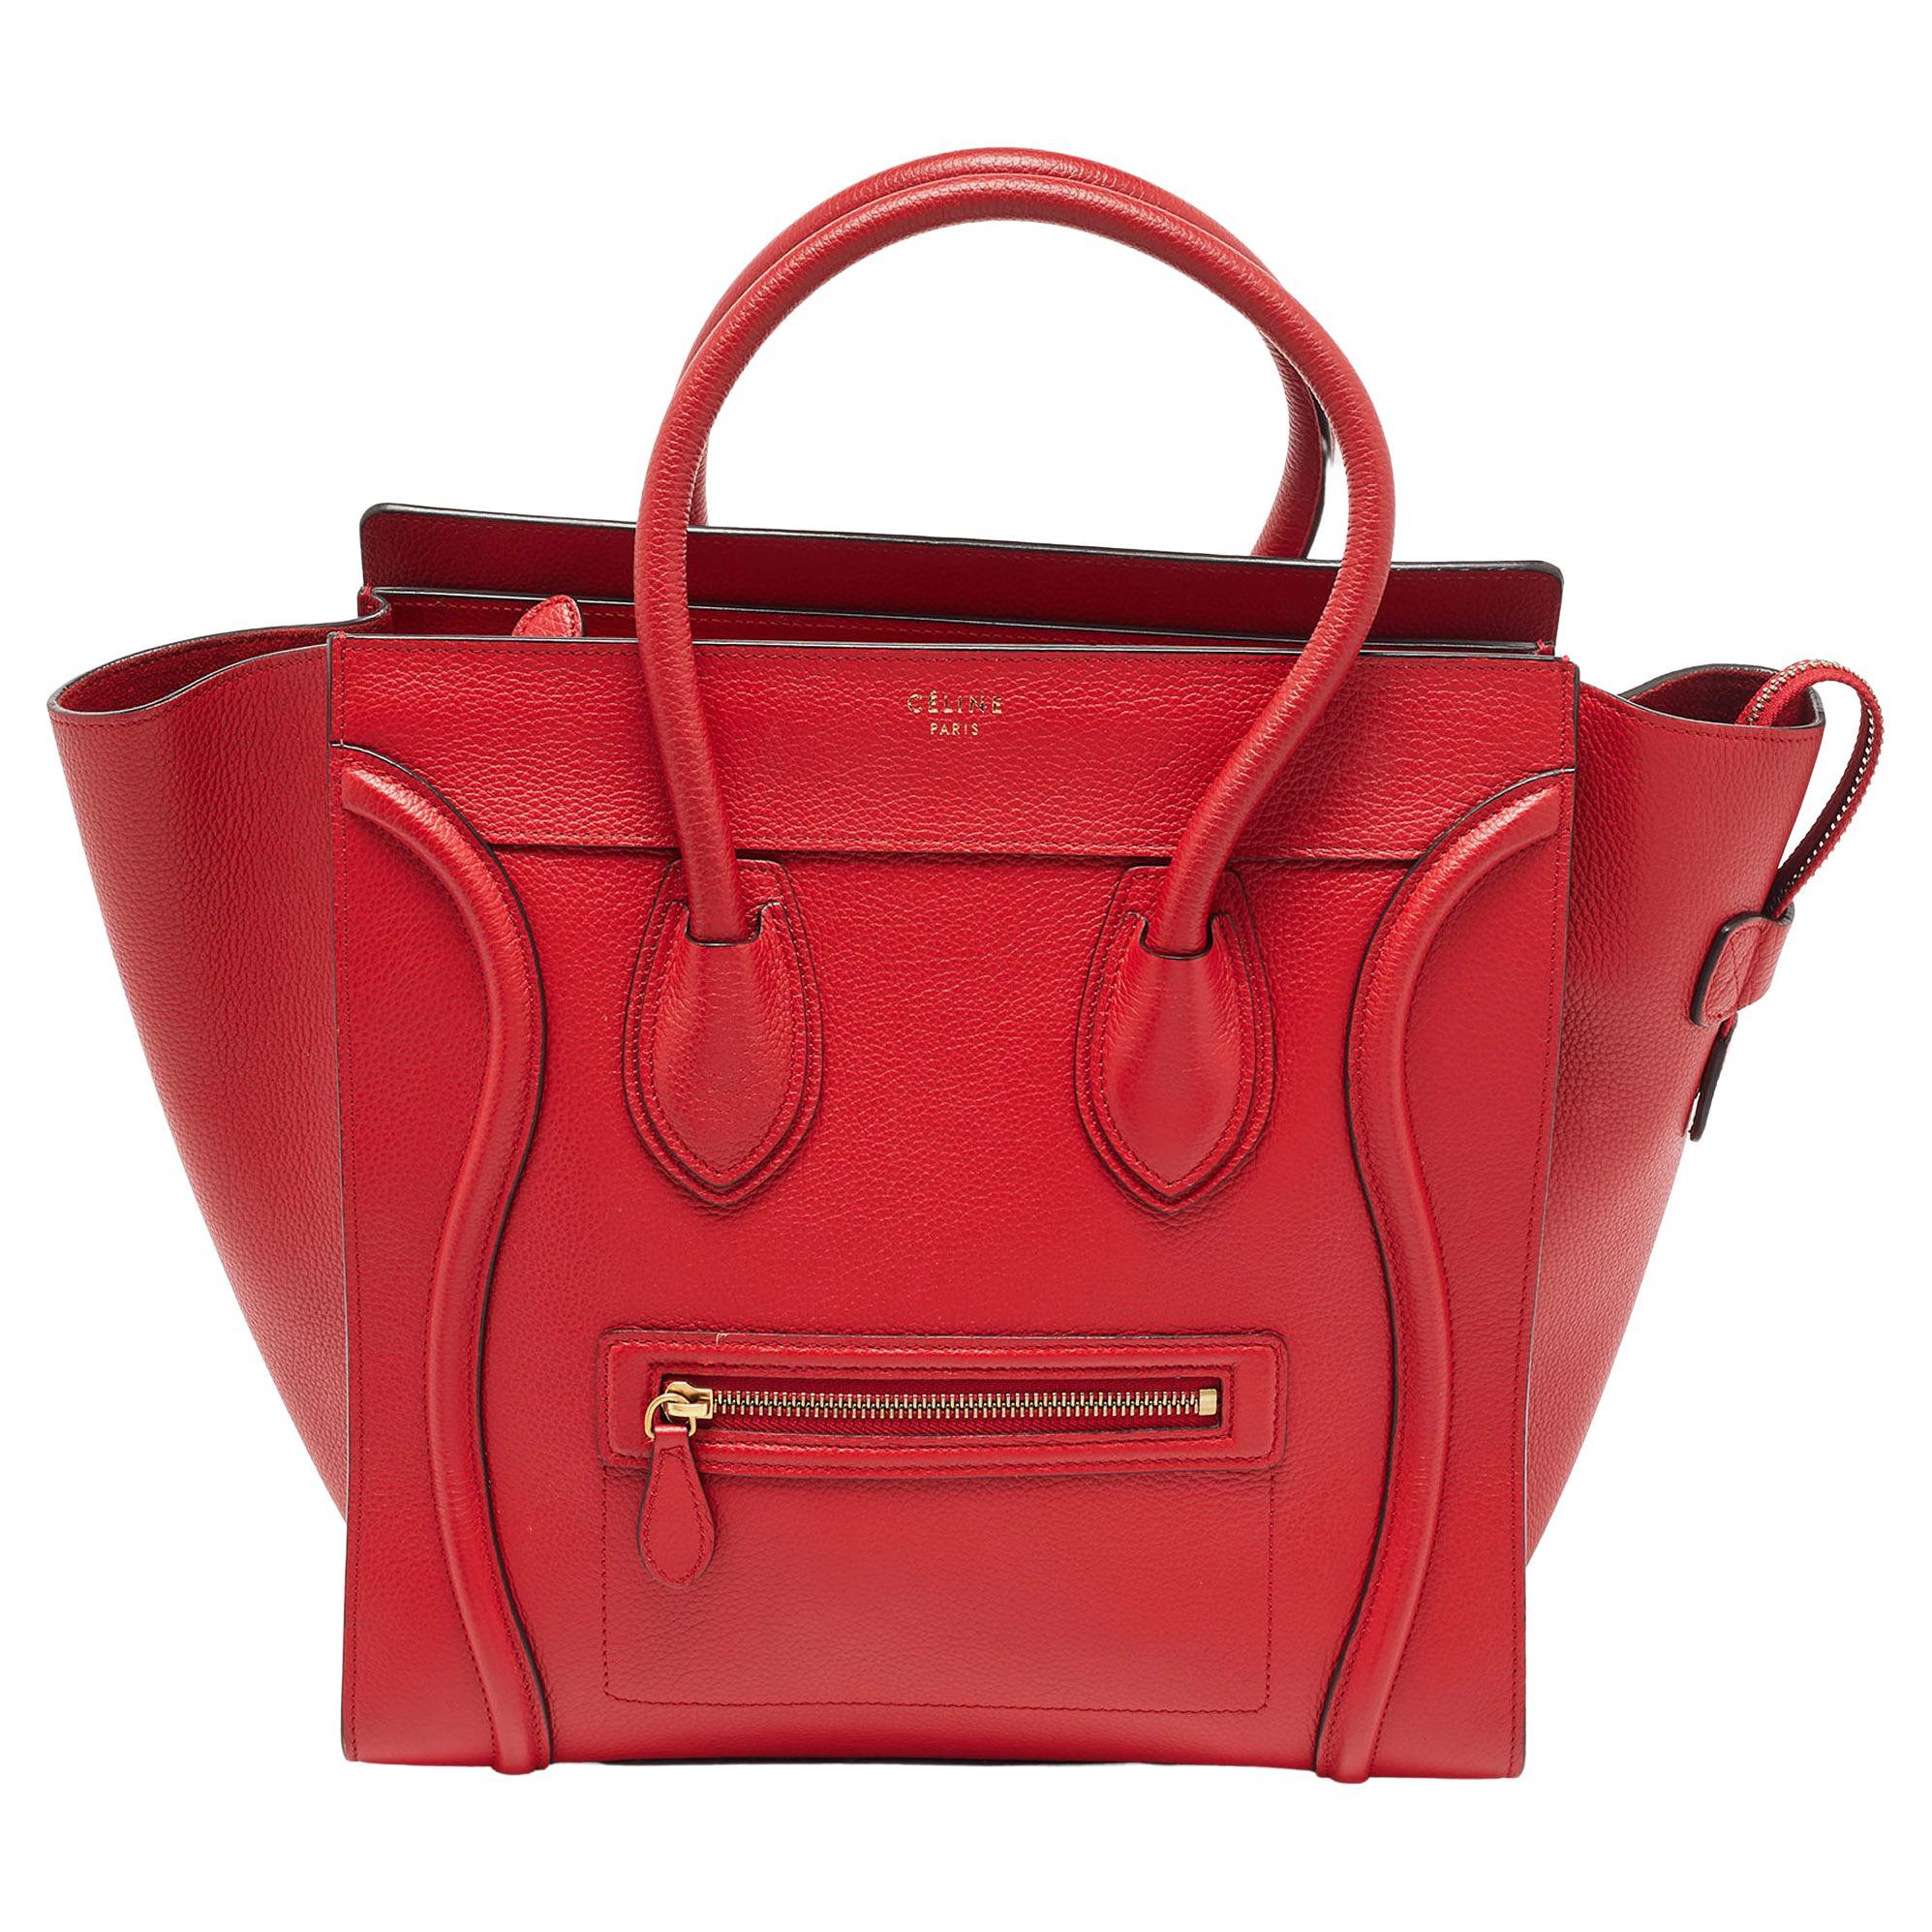 Celine Red Leather Mini Luggage Tote For Sale